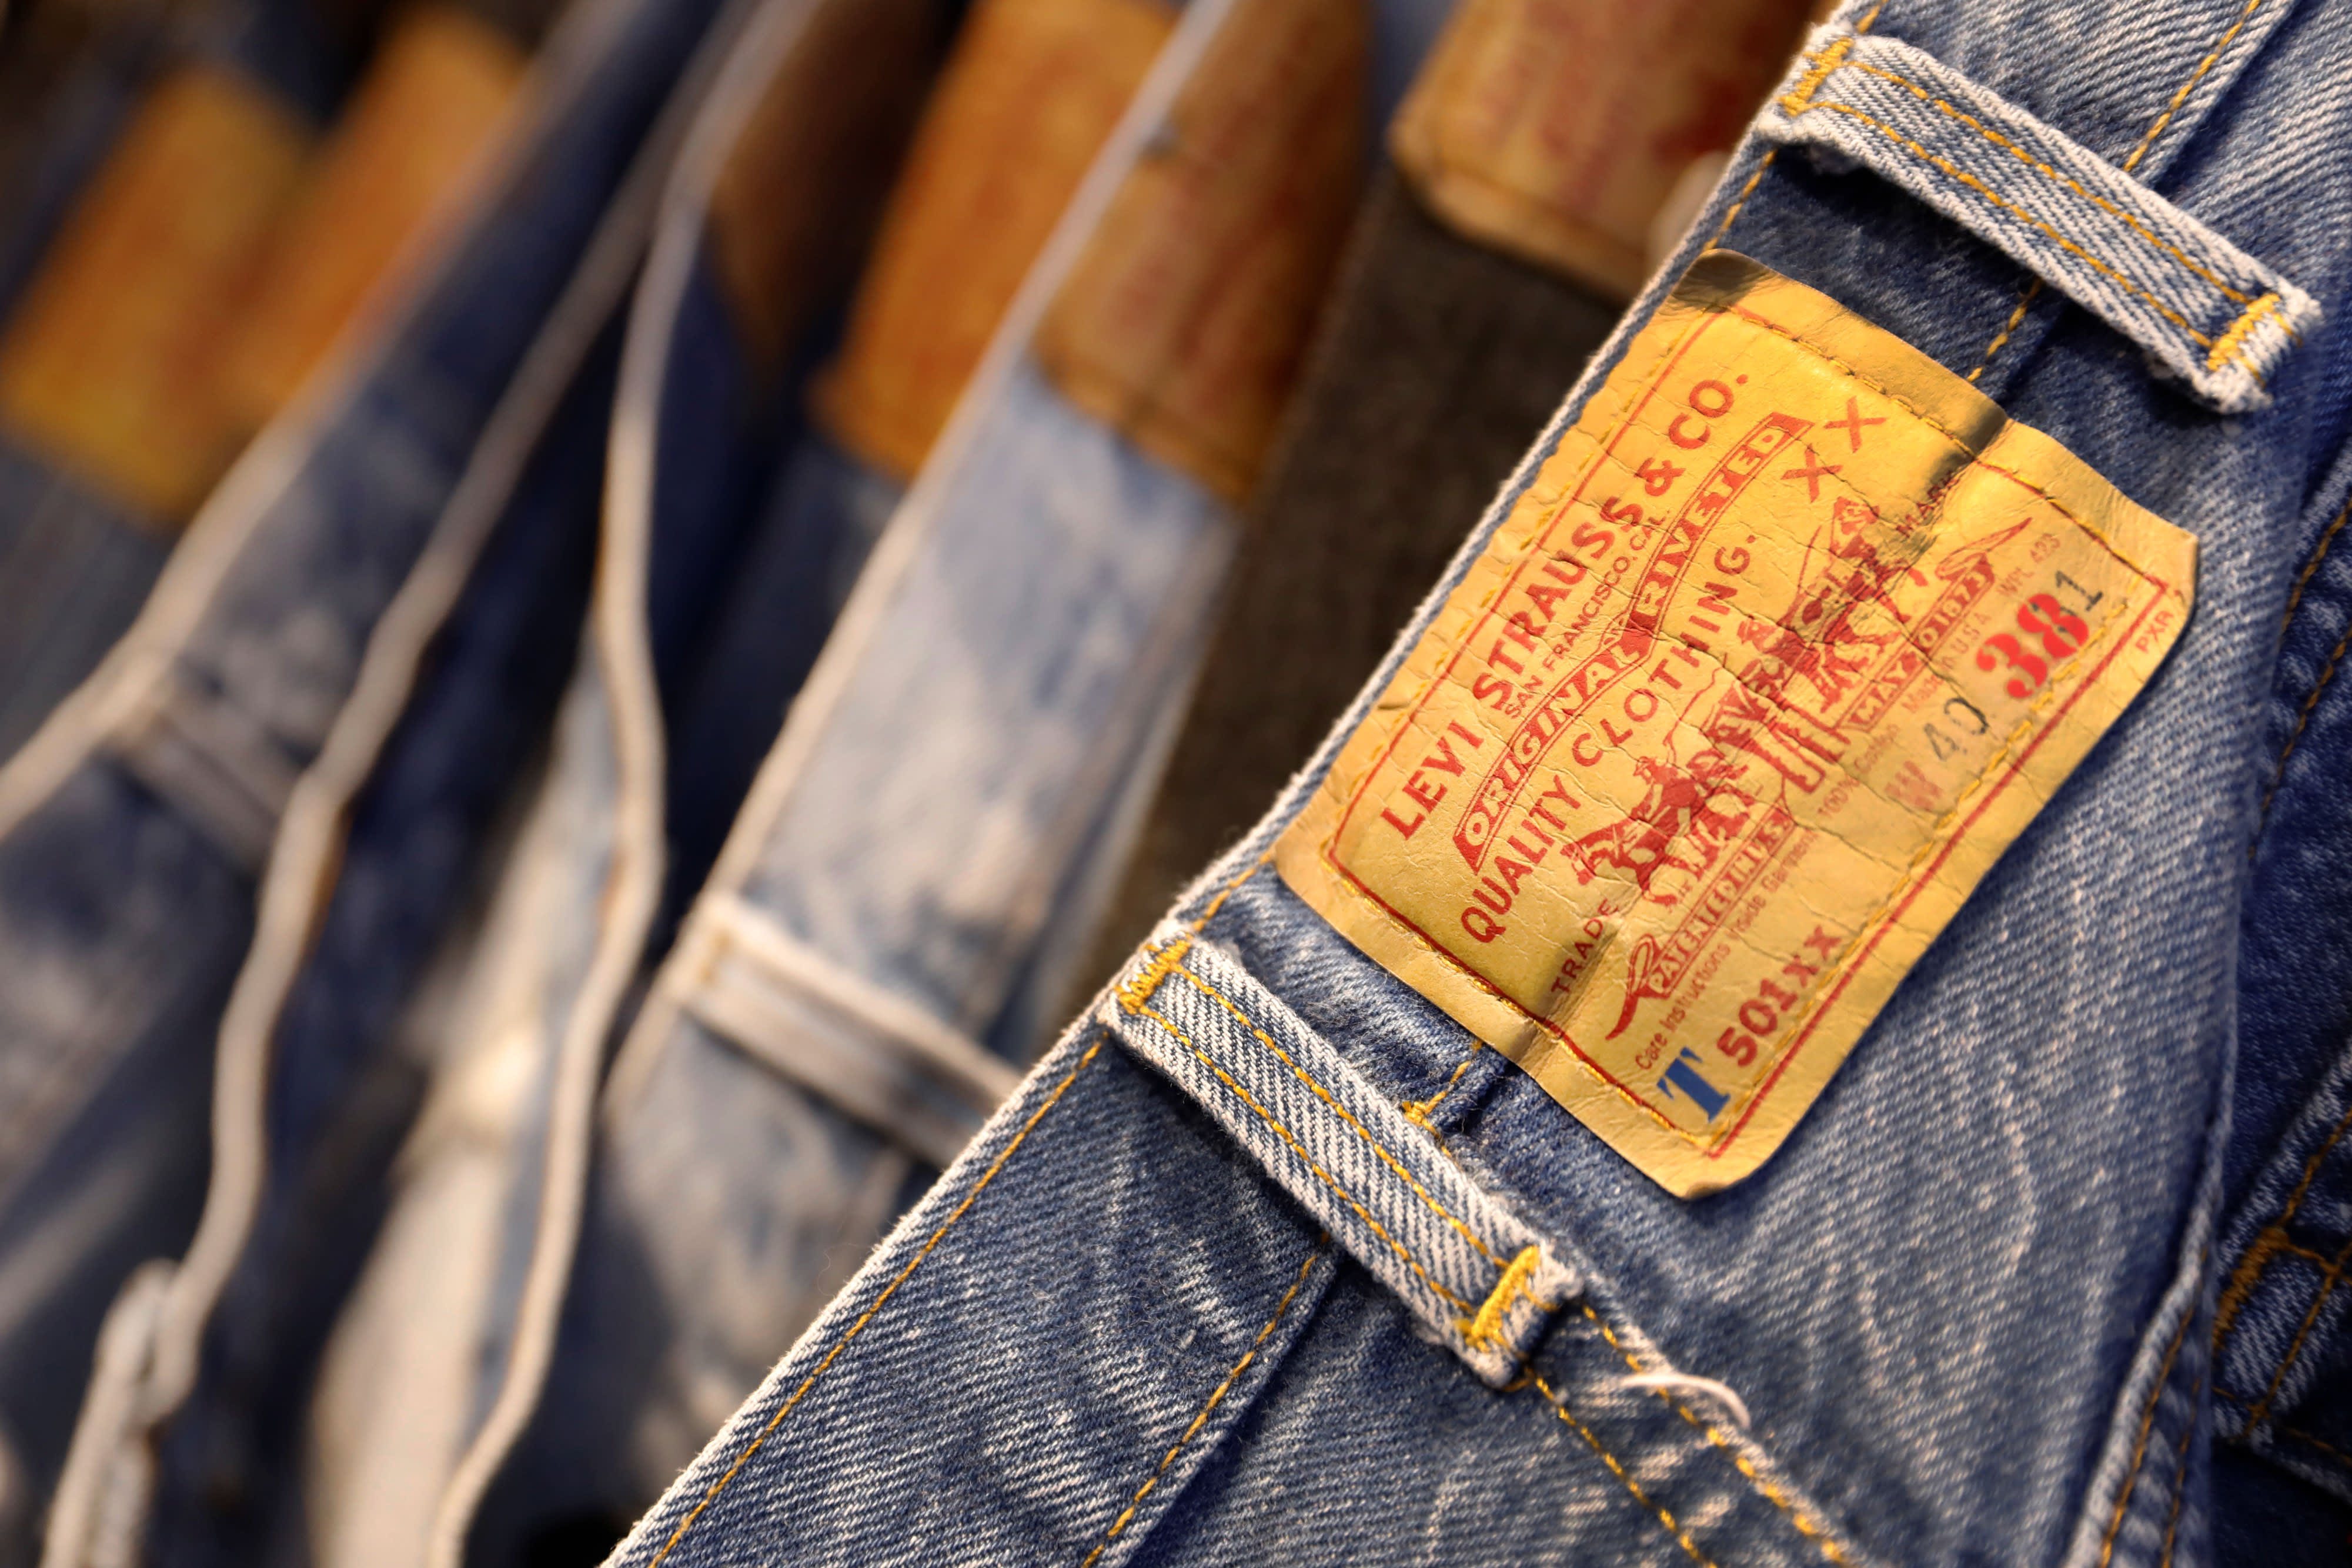 Levi Strauss, WD-40, fuboTV and more